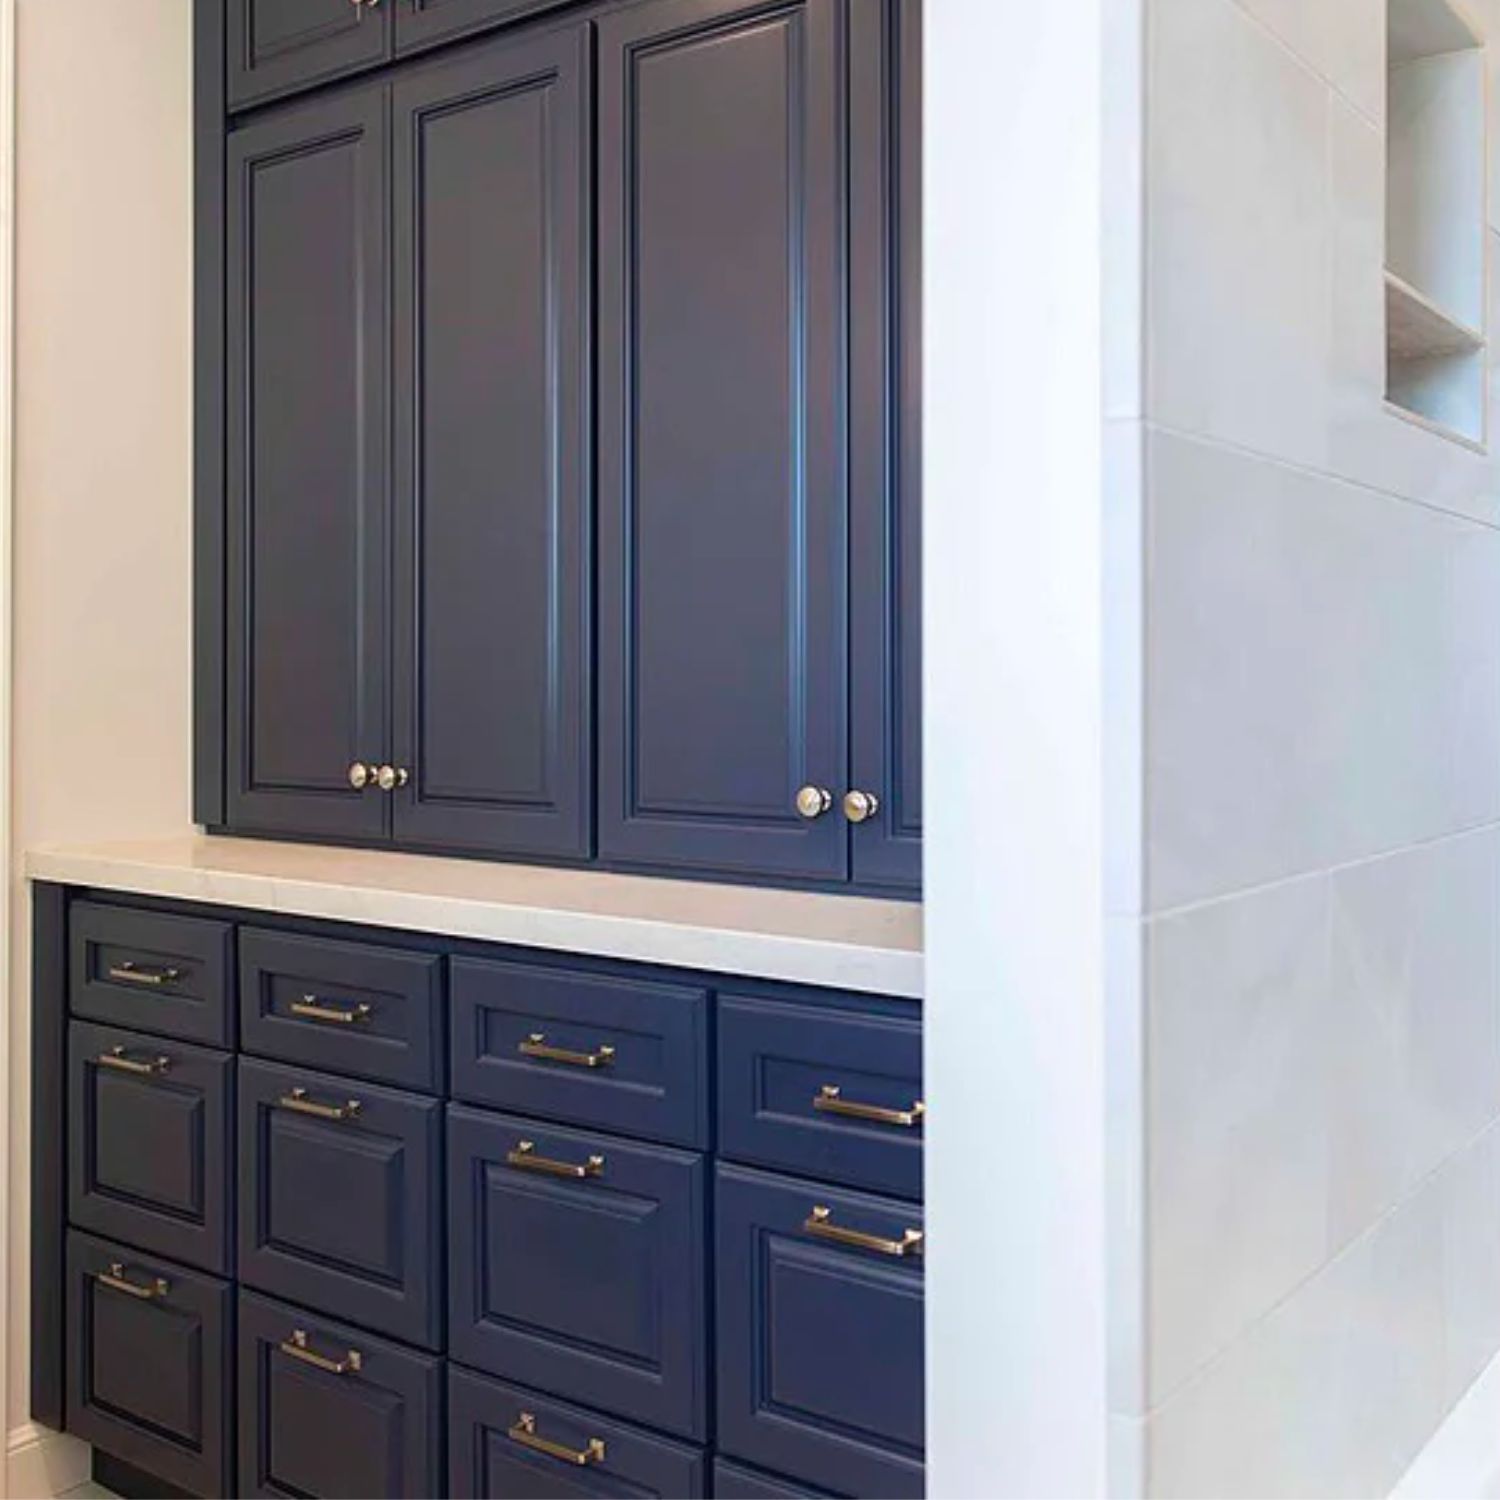 The Best Place to Buy Cabinets Option: Cabinets To Go